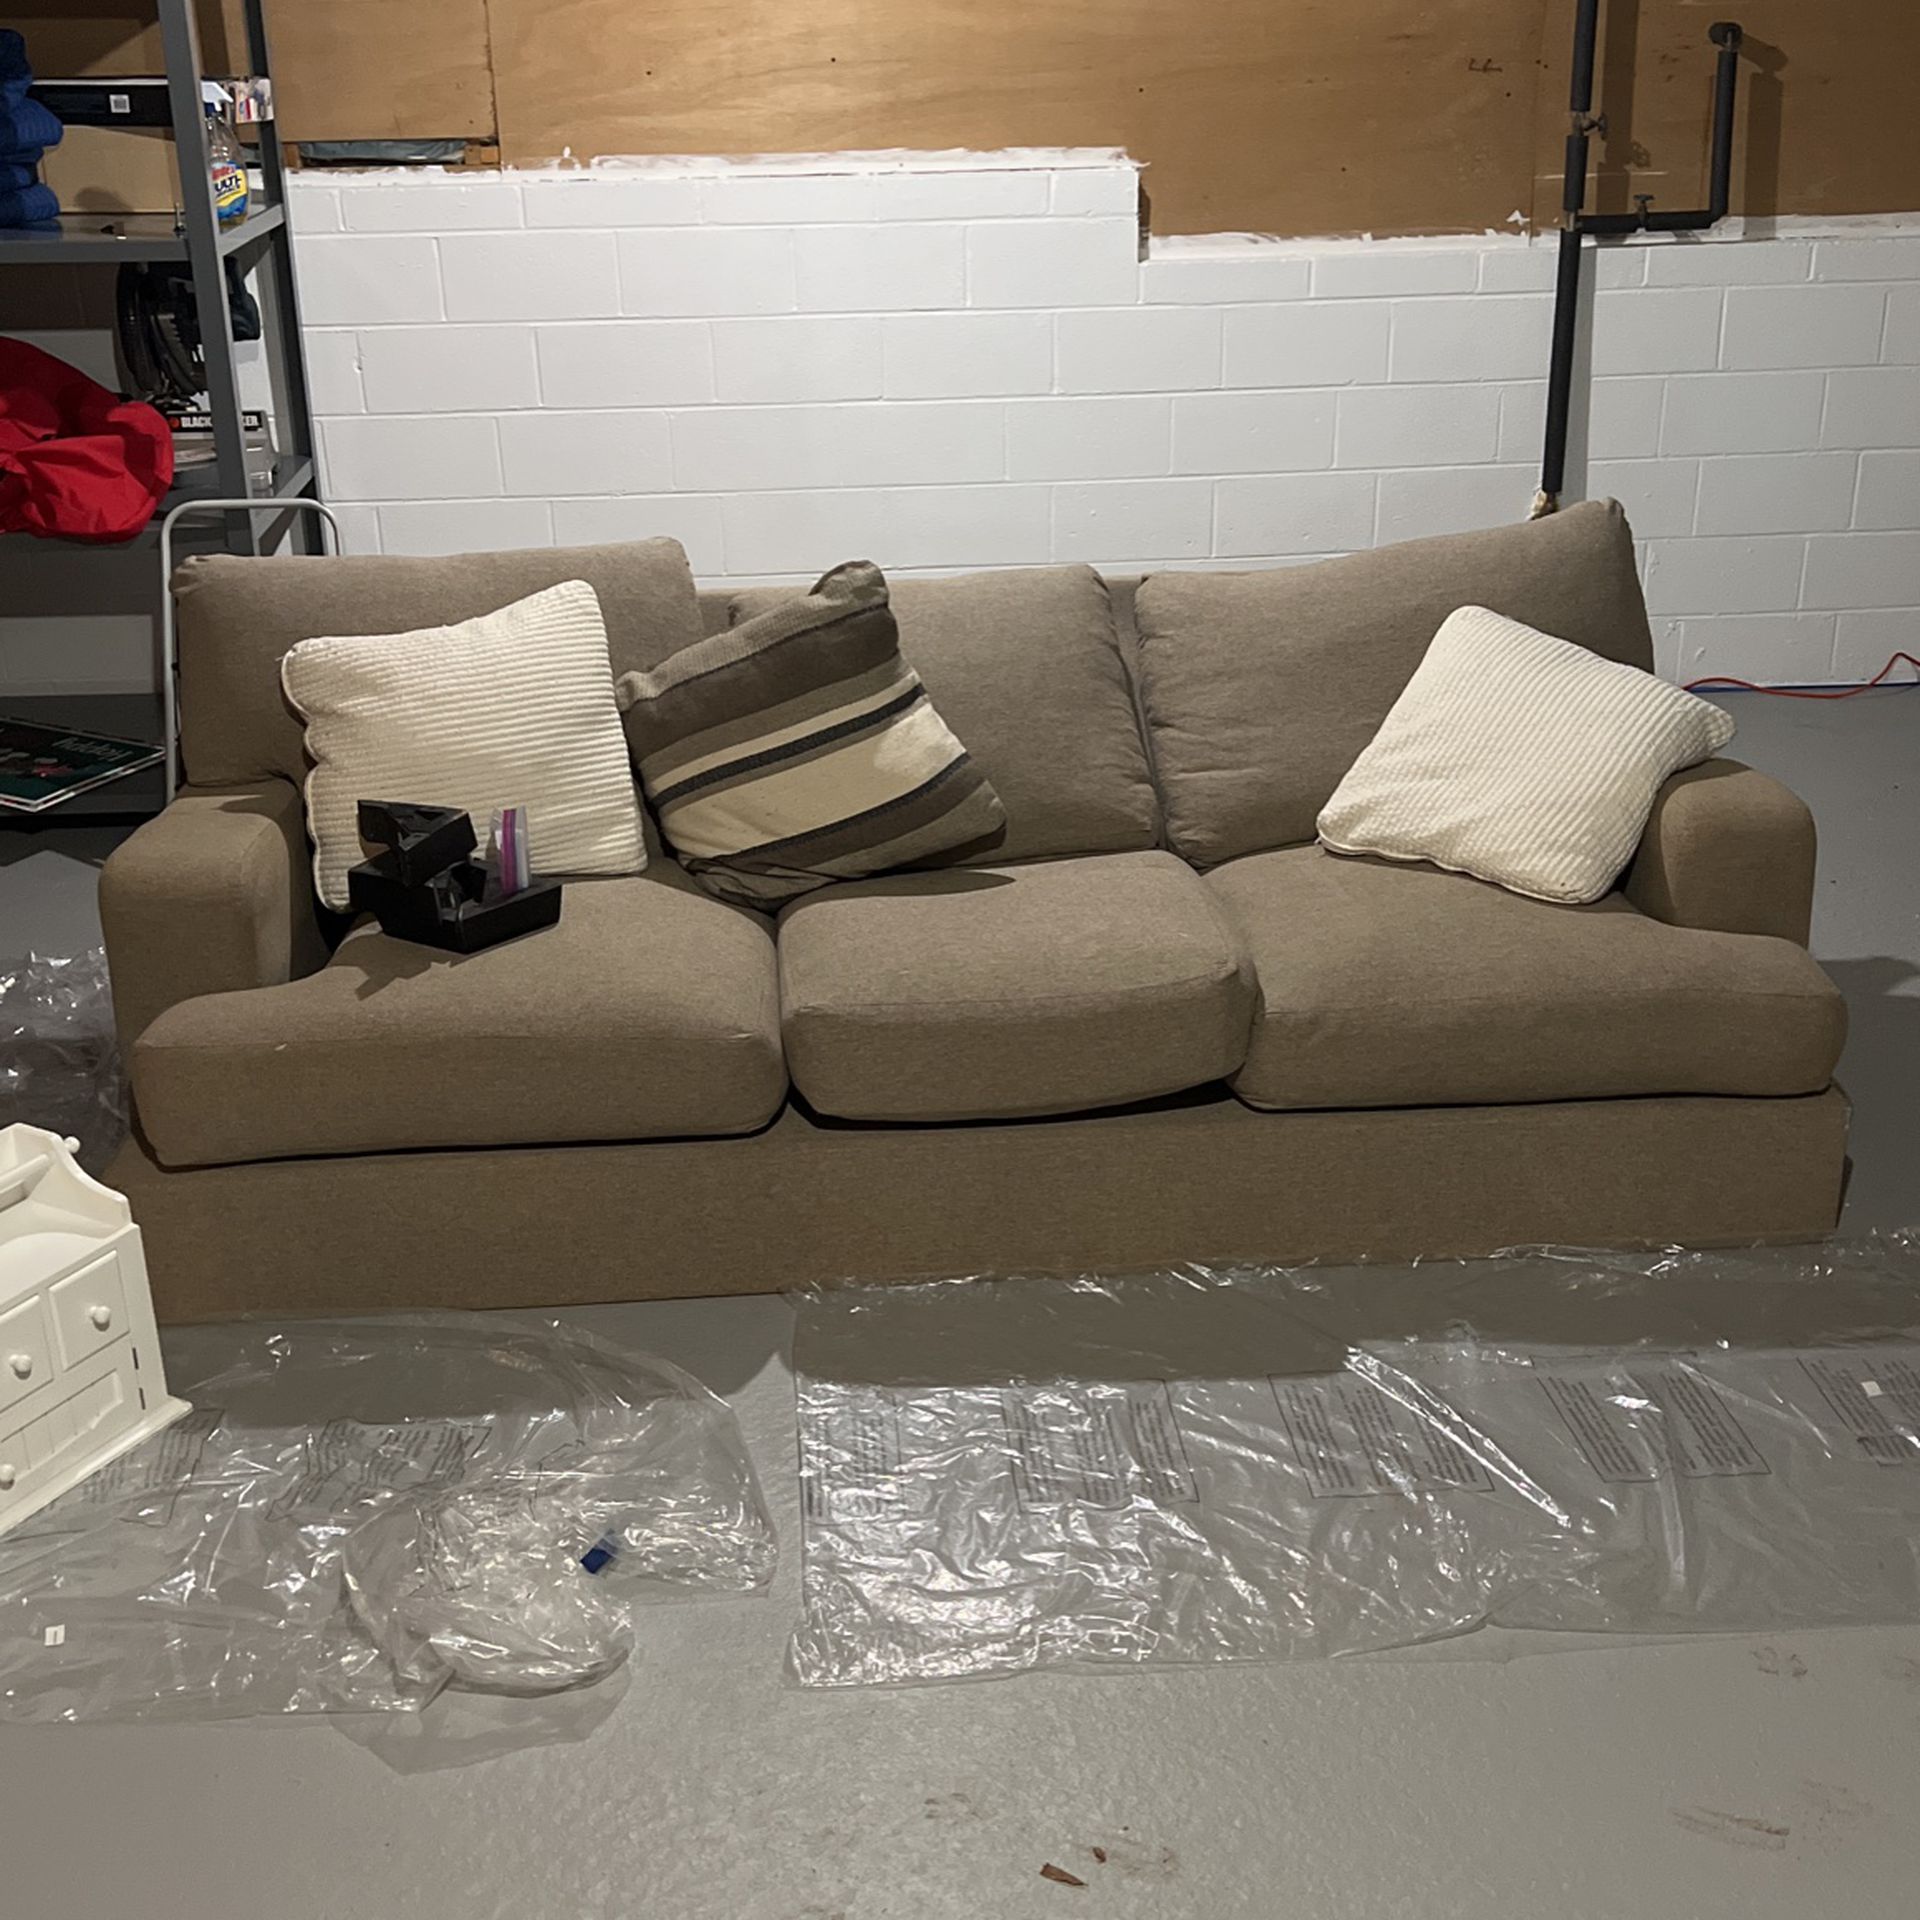 Catena Supermarked fup Sofa For Sale for Sale in Roswell, GA - OfferUp